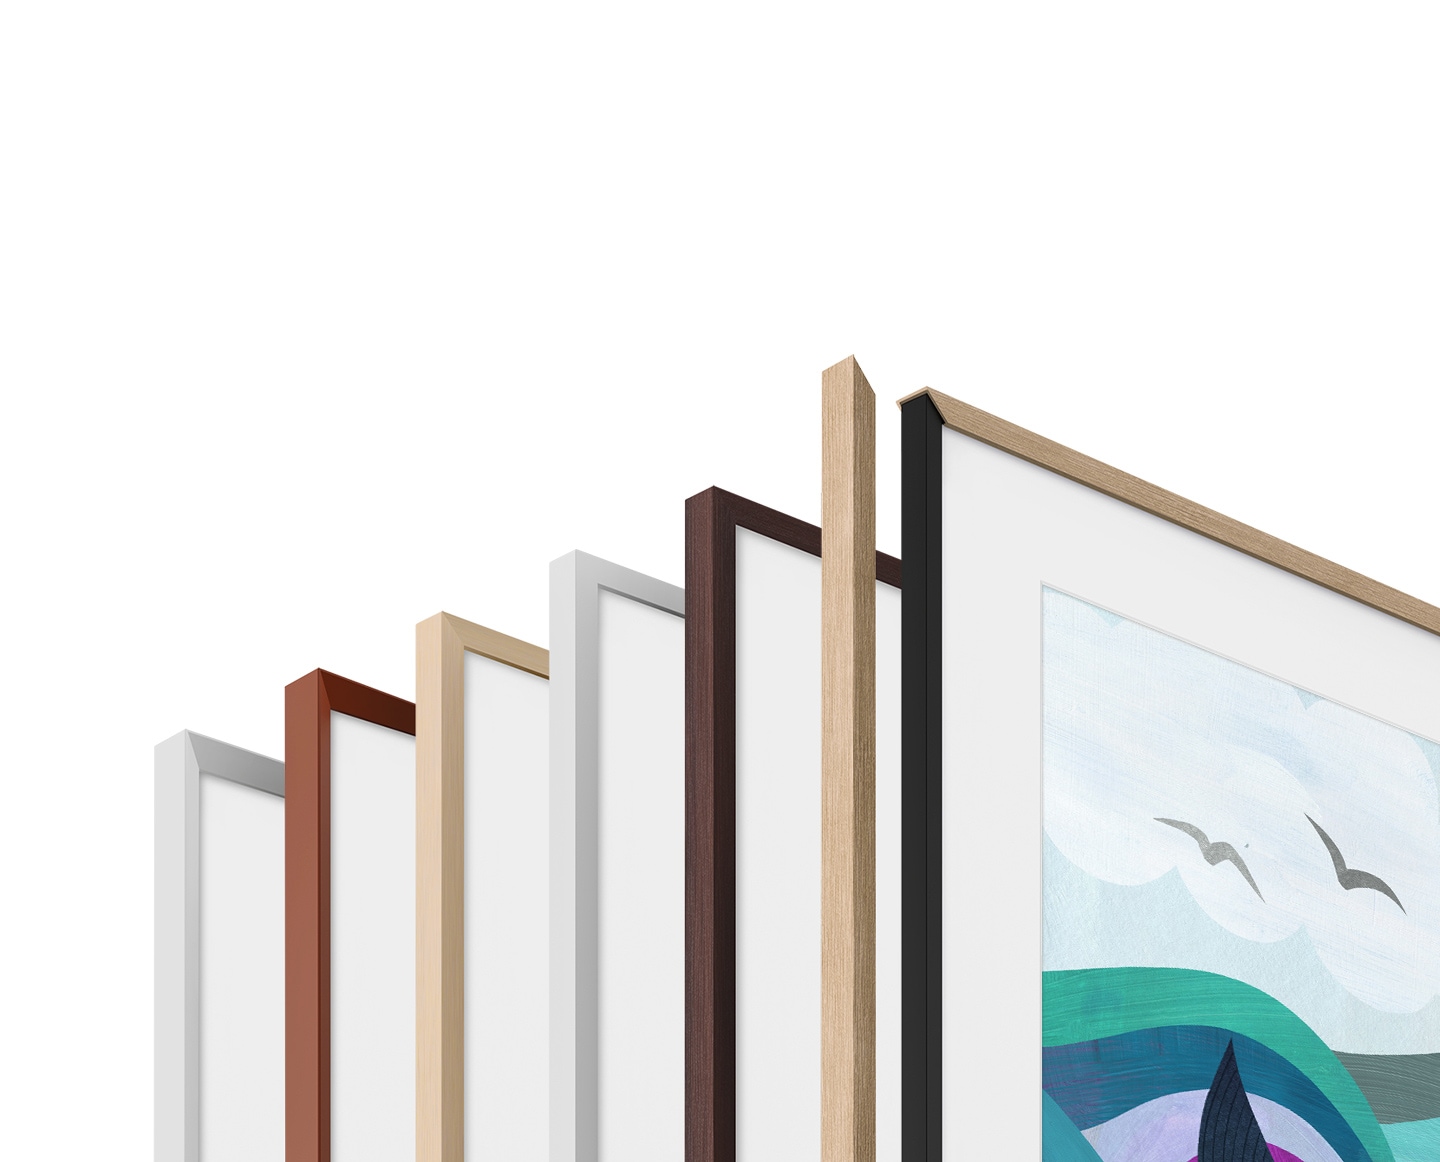 Match your space with customizable frames